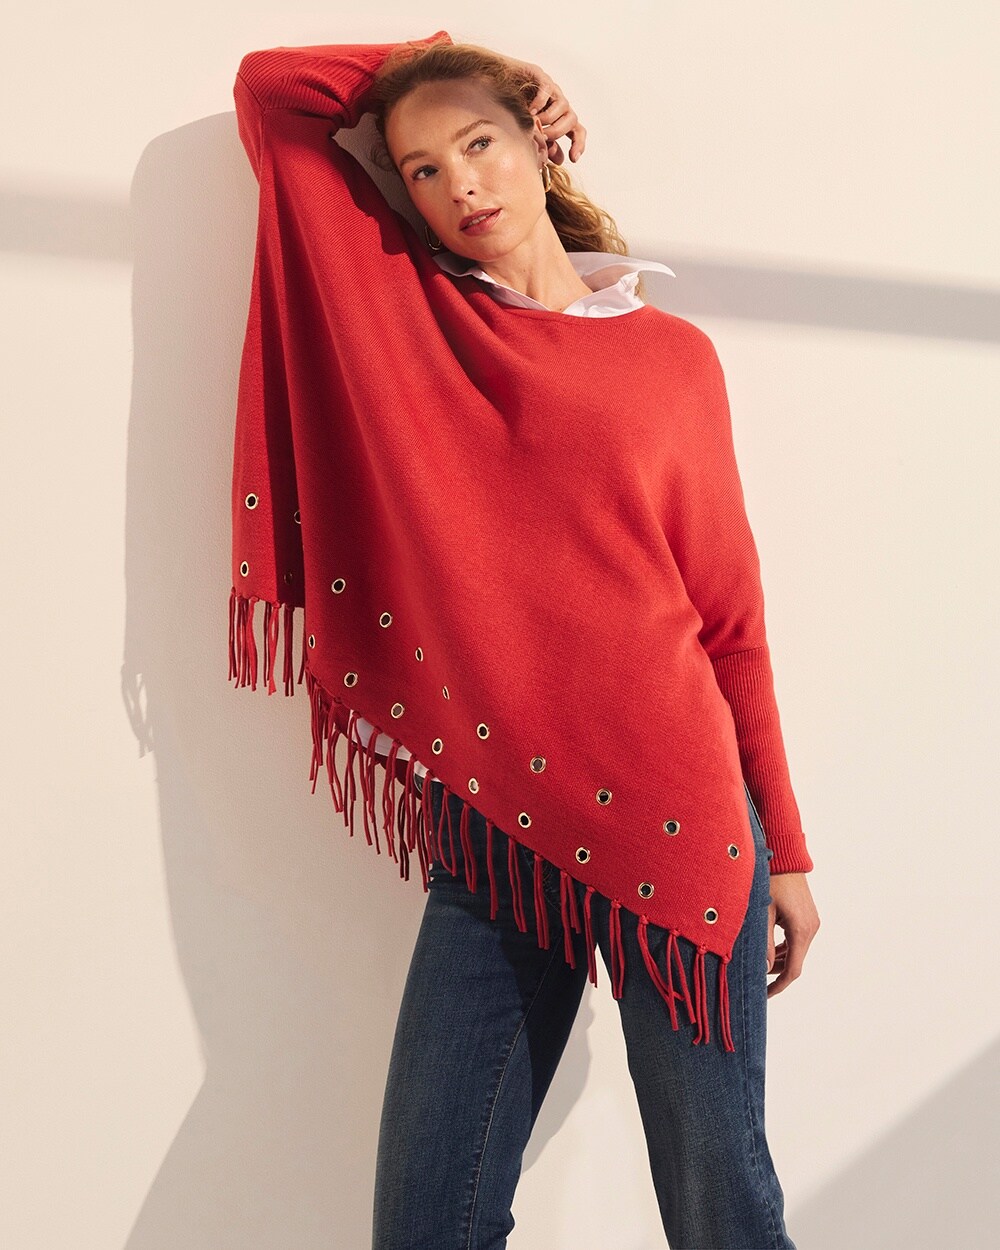 Red Embellished Sweater Poncho video preview image, click to start video